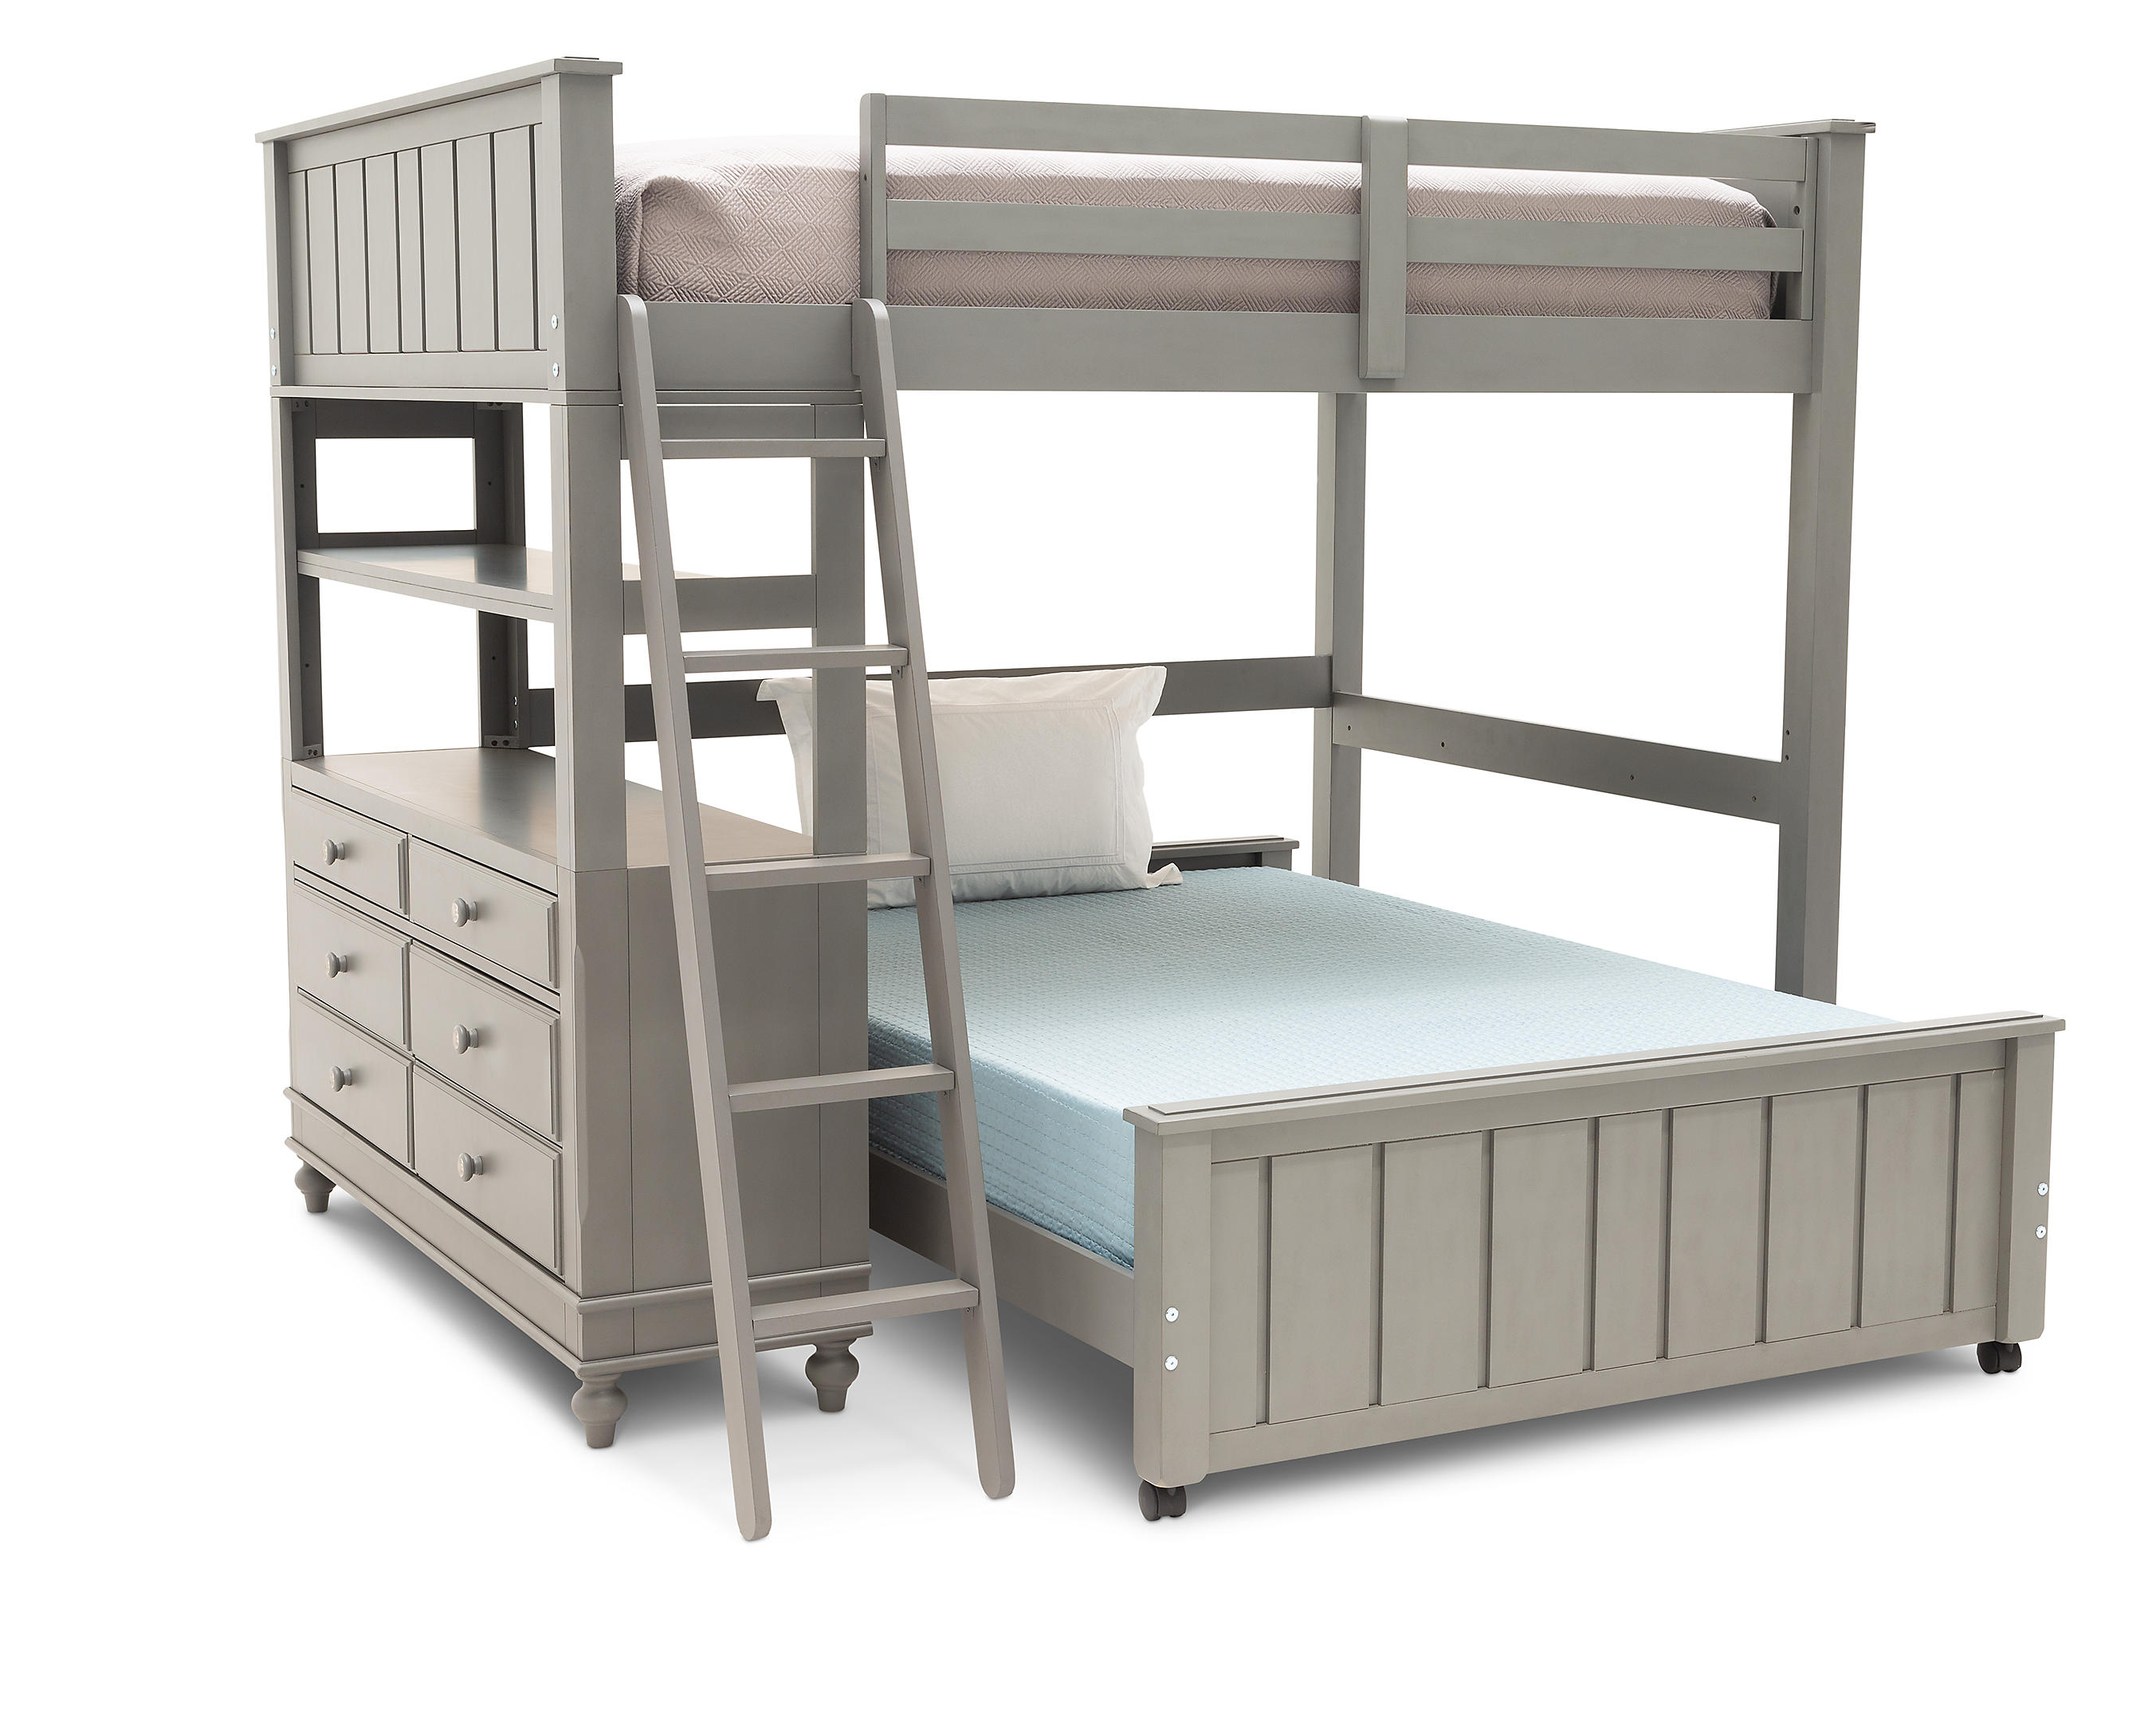 Lake House Loft Bed With Full Lower, Bunk Bed Full Loft